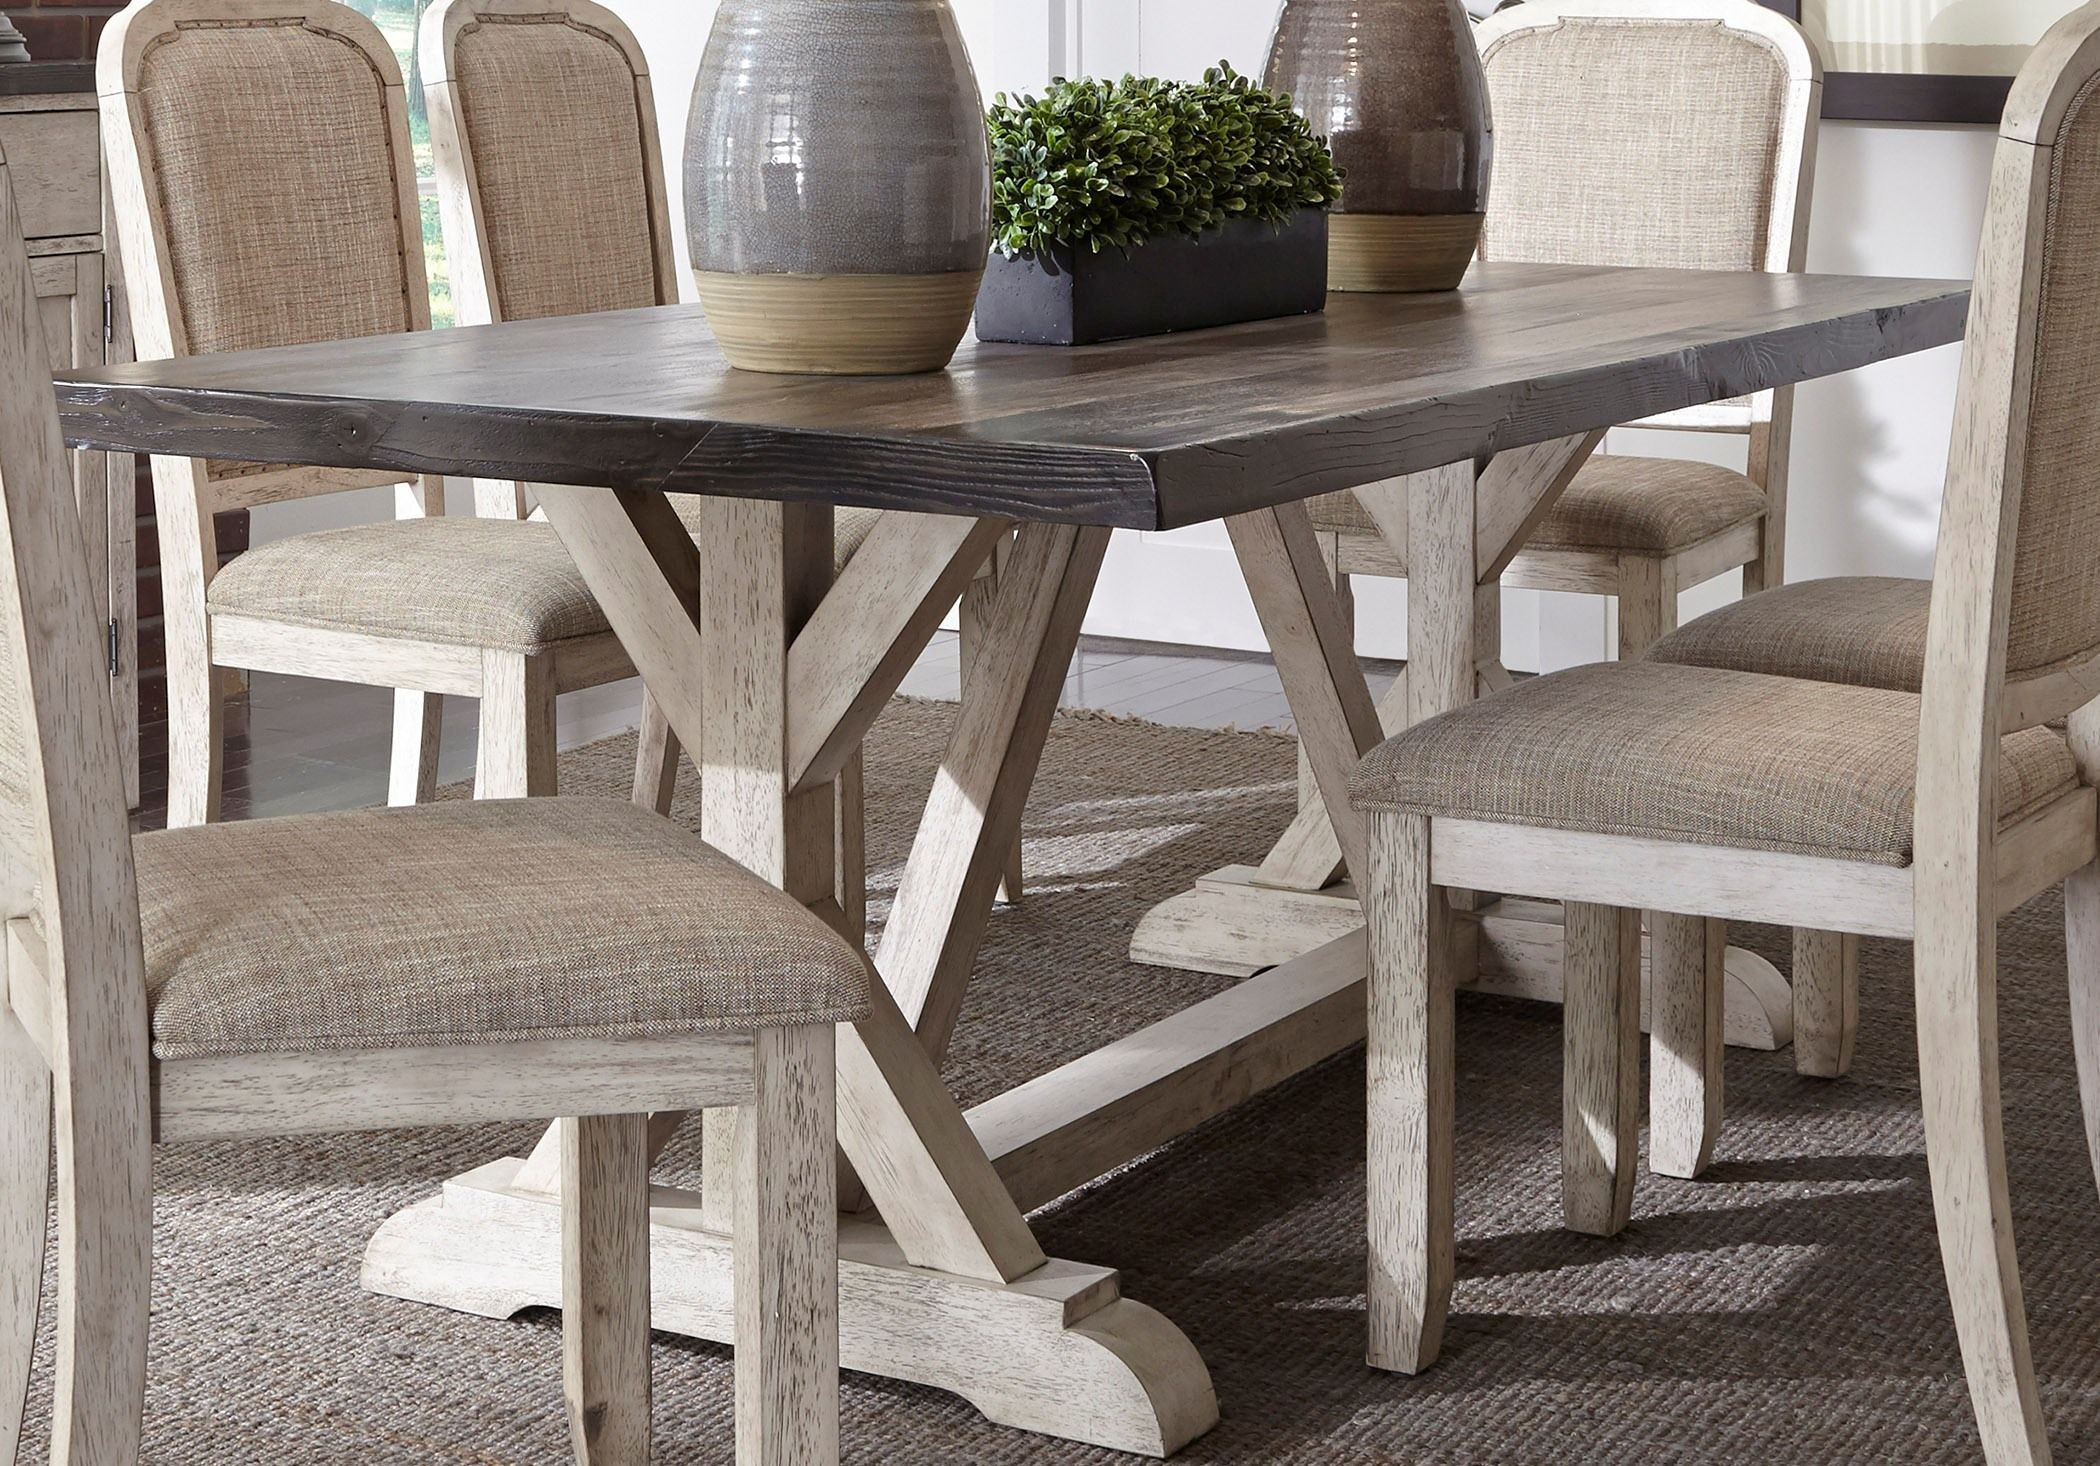 White Rustic Kitchen Table
 Willowrun Rustic White Trestle Dining Table from Liberty